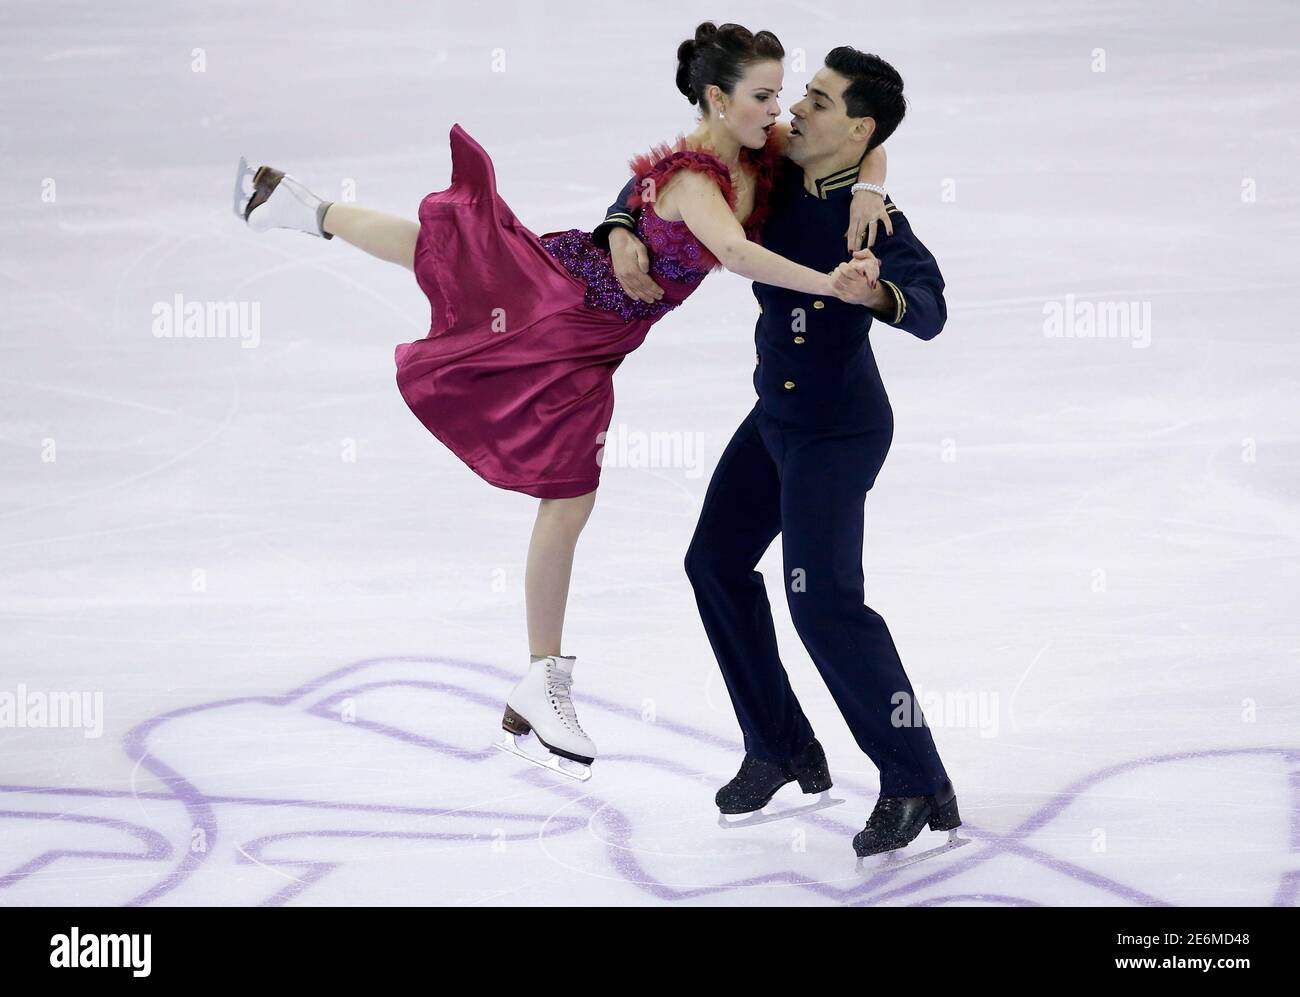 Anna Cappellini and Luca Lanotte of Italy perform during the ice dance  short dance program at the ISU Grand Prix of Figure Skating final in  Barcelona, Spain, December 11, 2015. REUTERS/Albert Gea